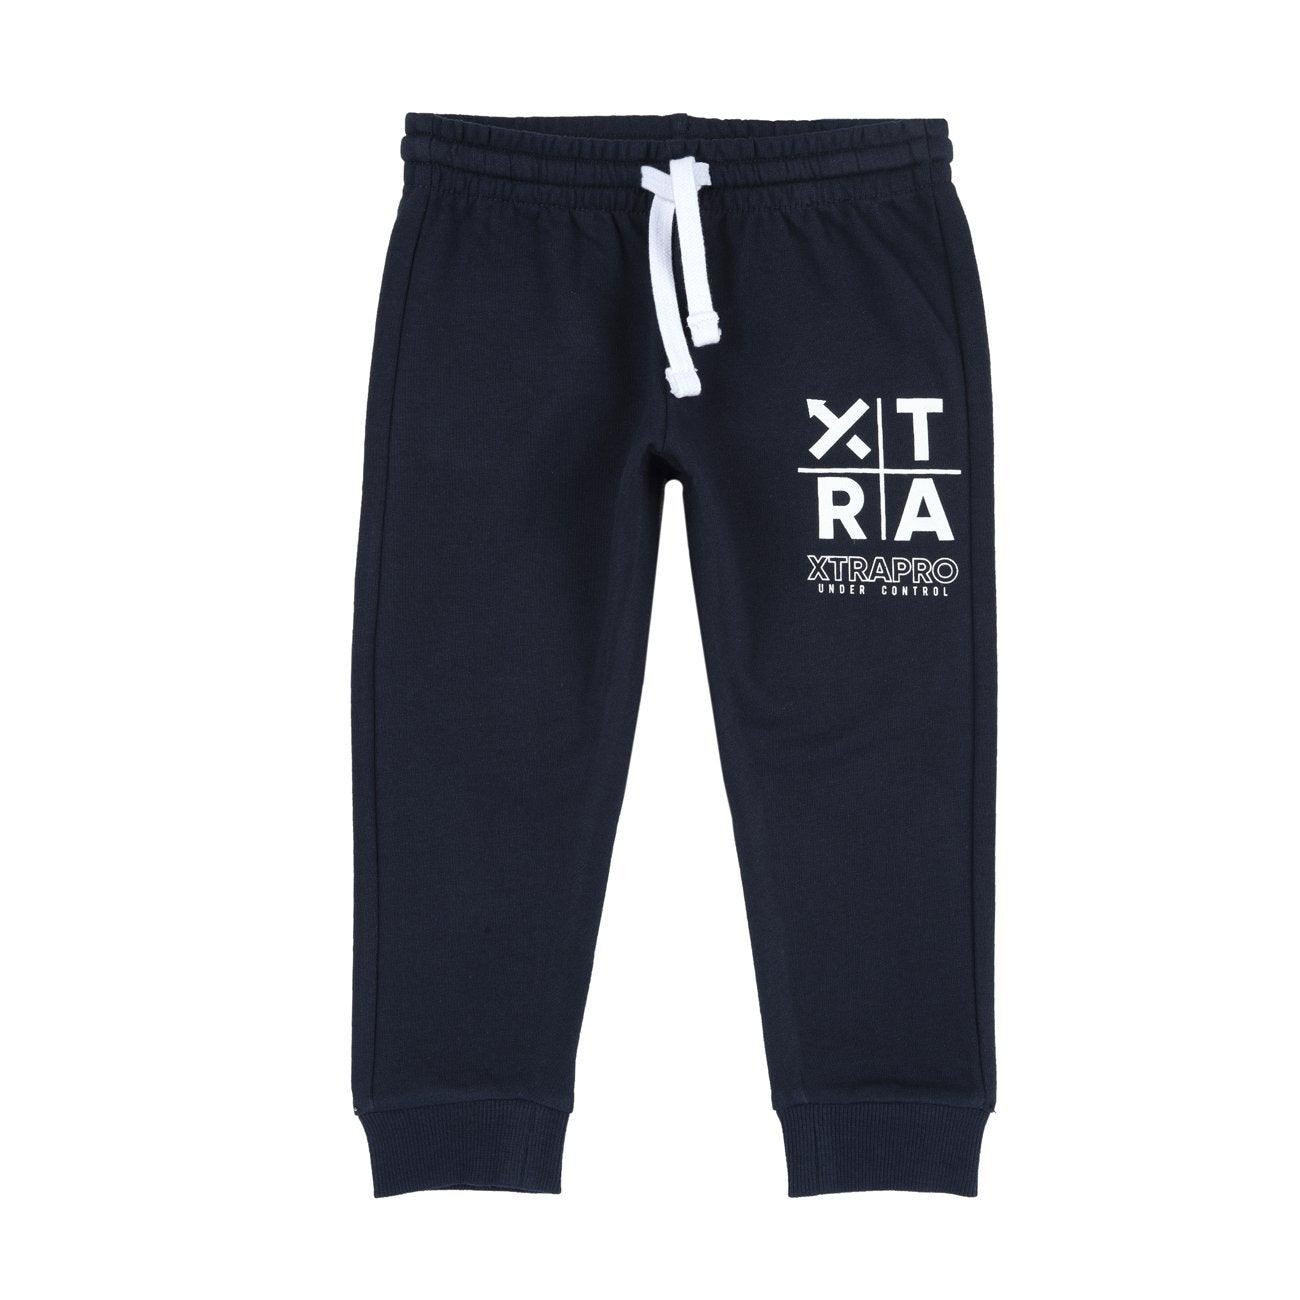 Premium Quality "XTRAPRO" Printed Sports Terry Trouser For Kids - Brands River